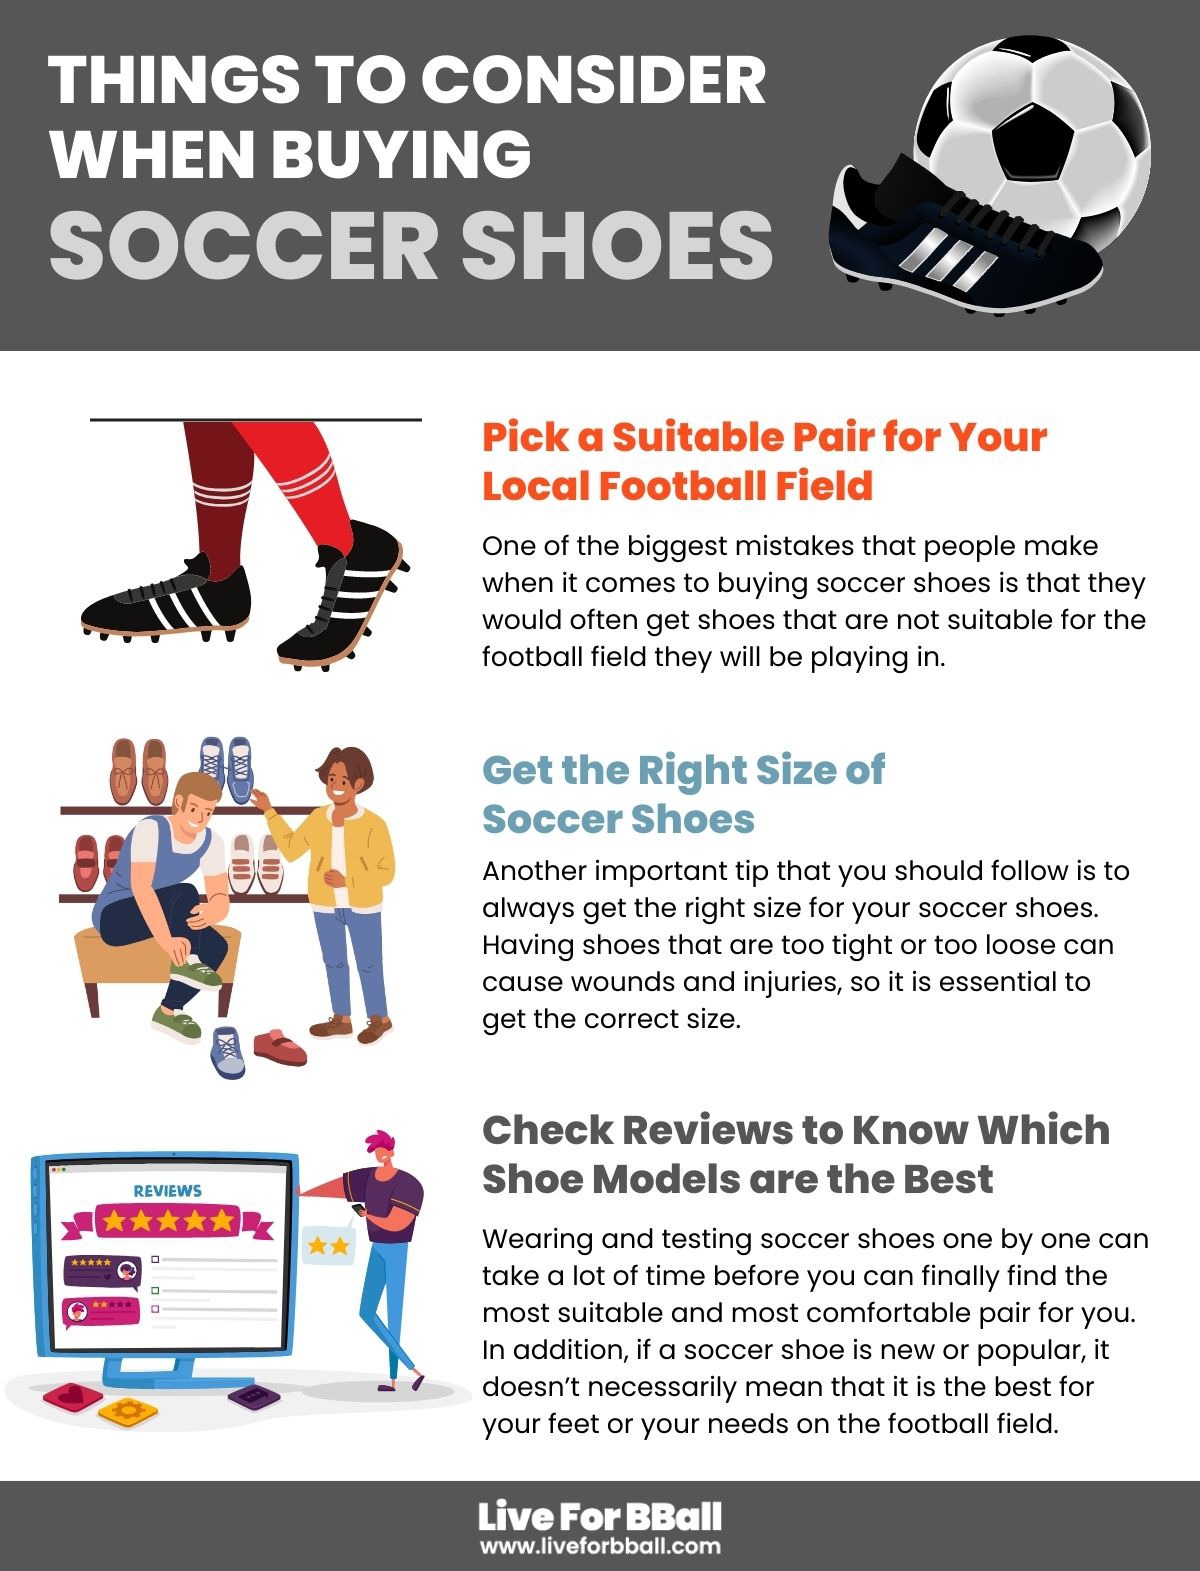 Things to Consider When Buying Soccer Shoes